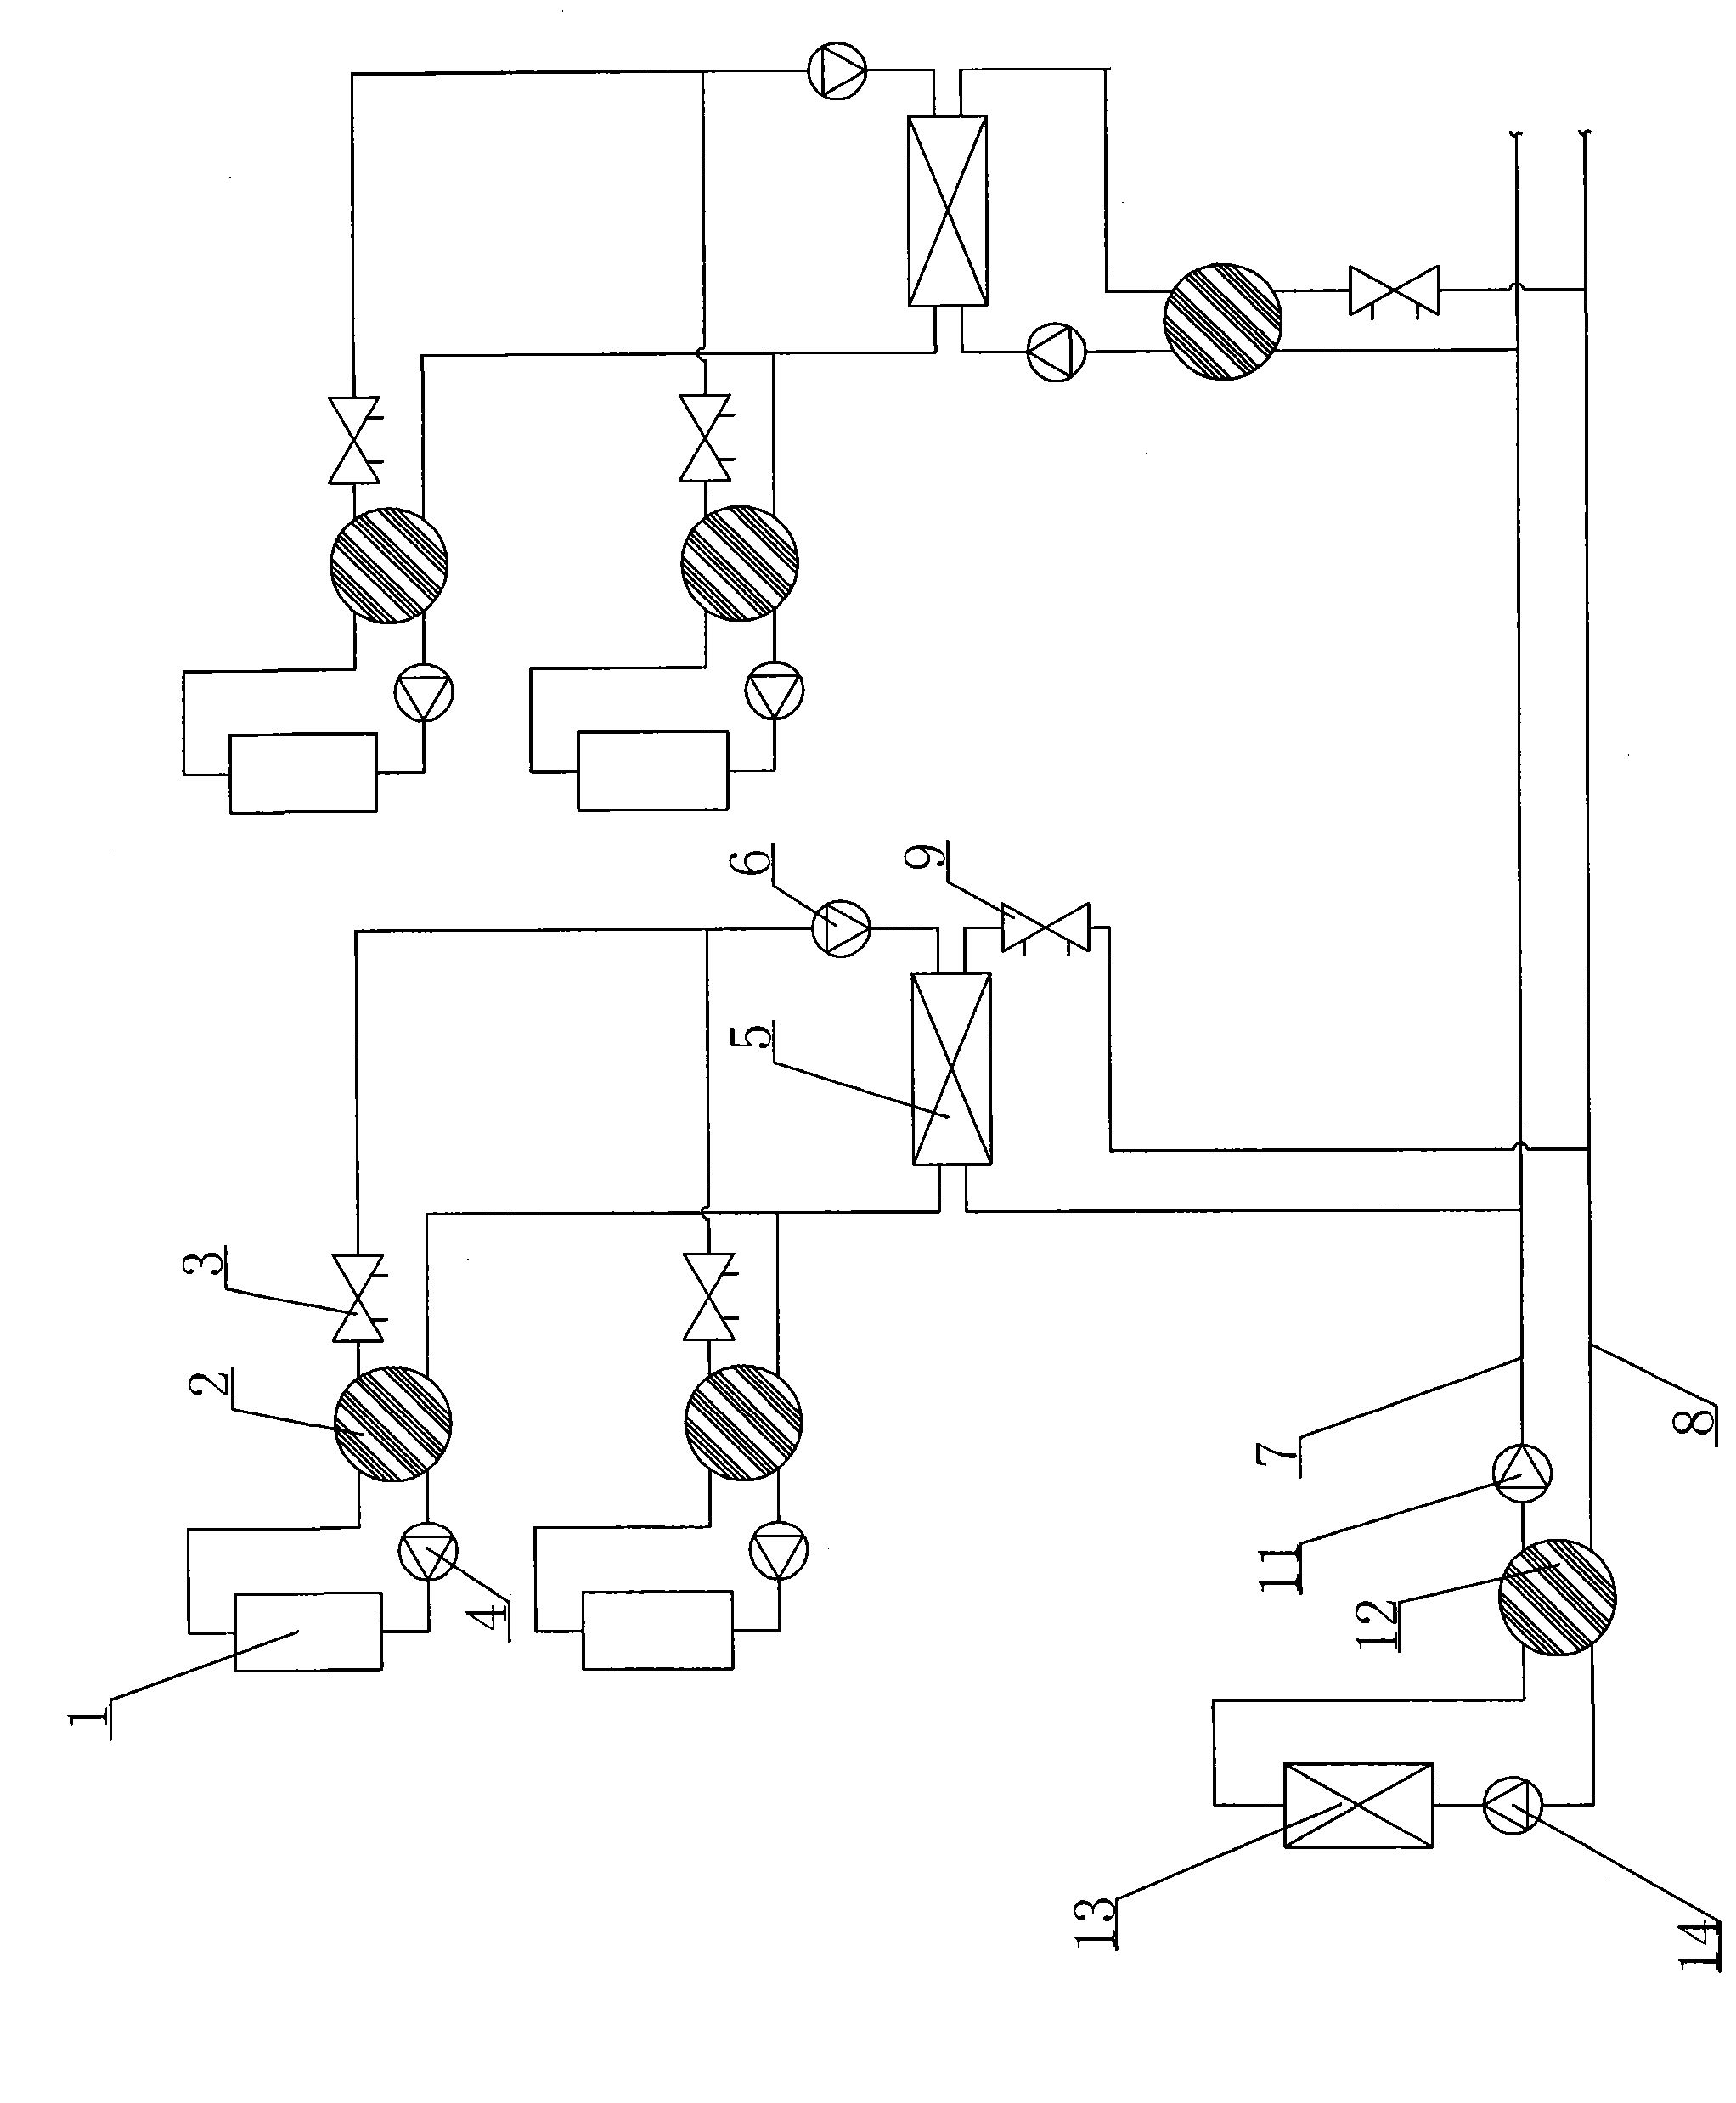 Arrangement method based on dynamic balance unit technology in hot water heating system